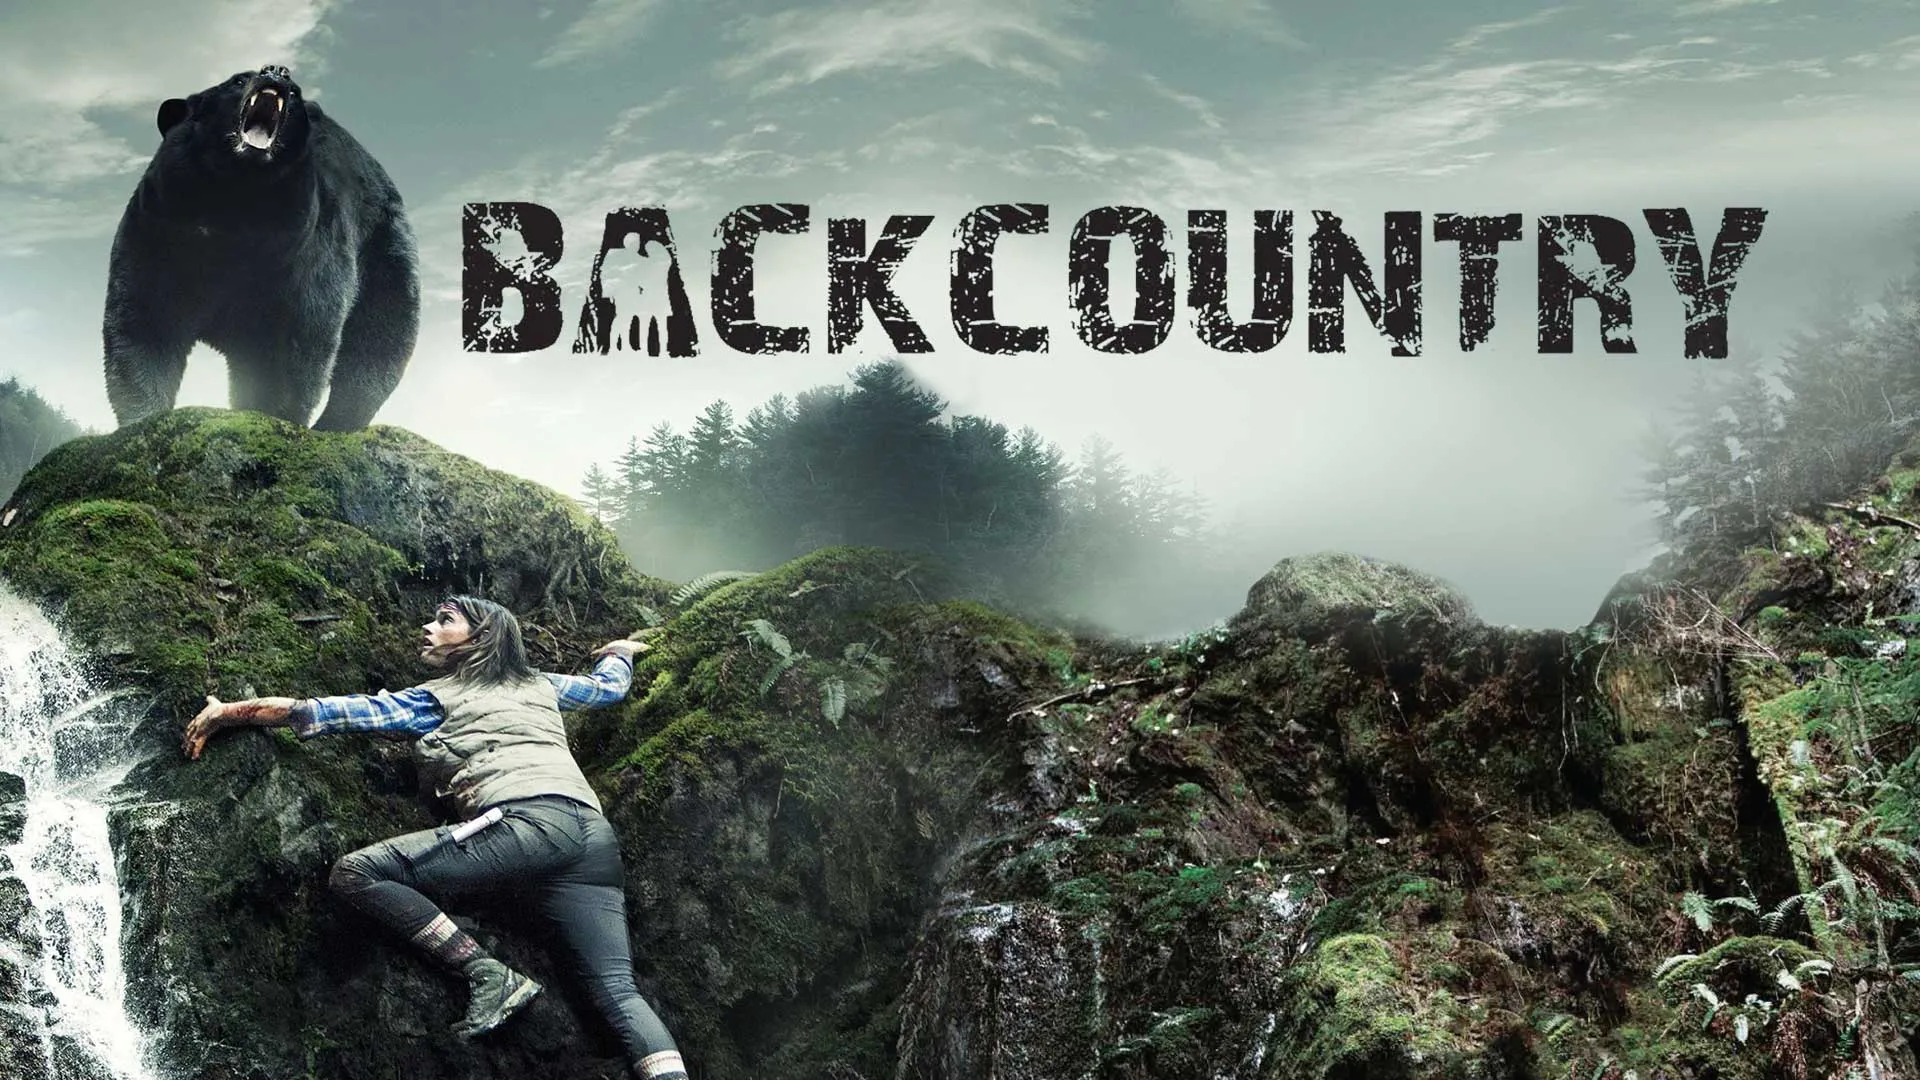 Where To Watch Backcountry Movie Online For Free